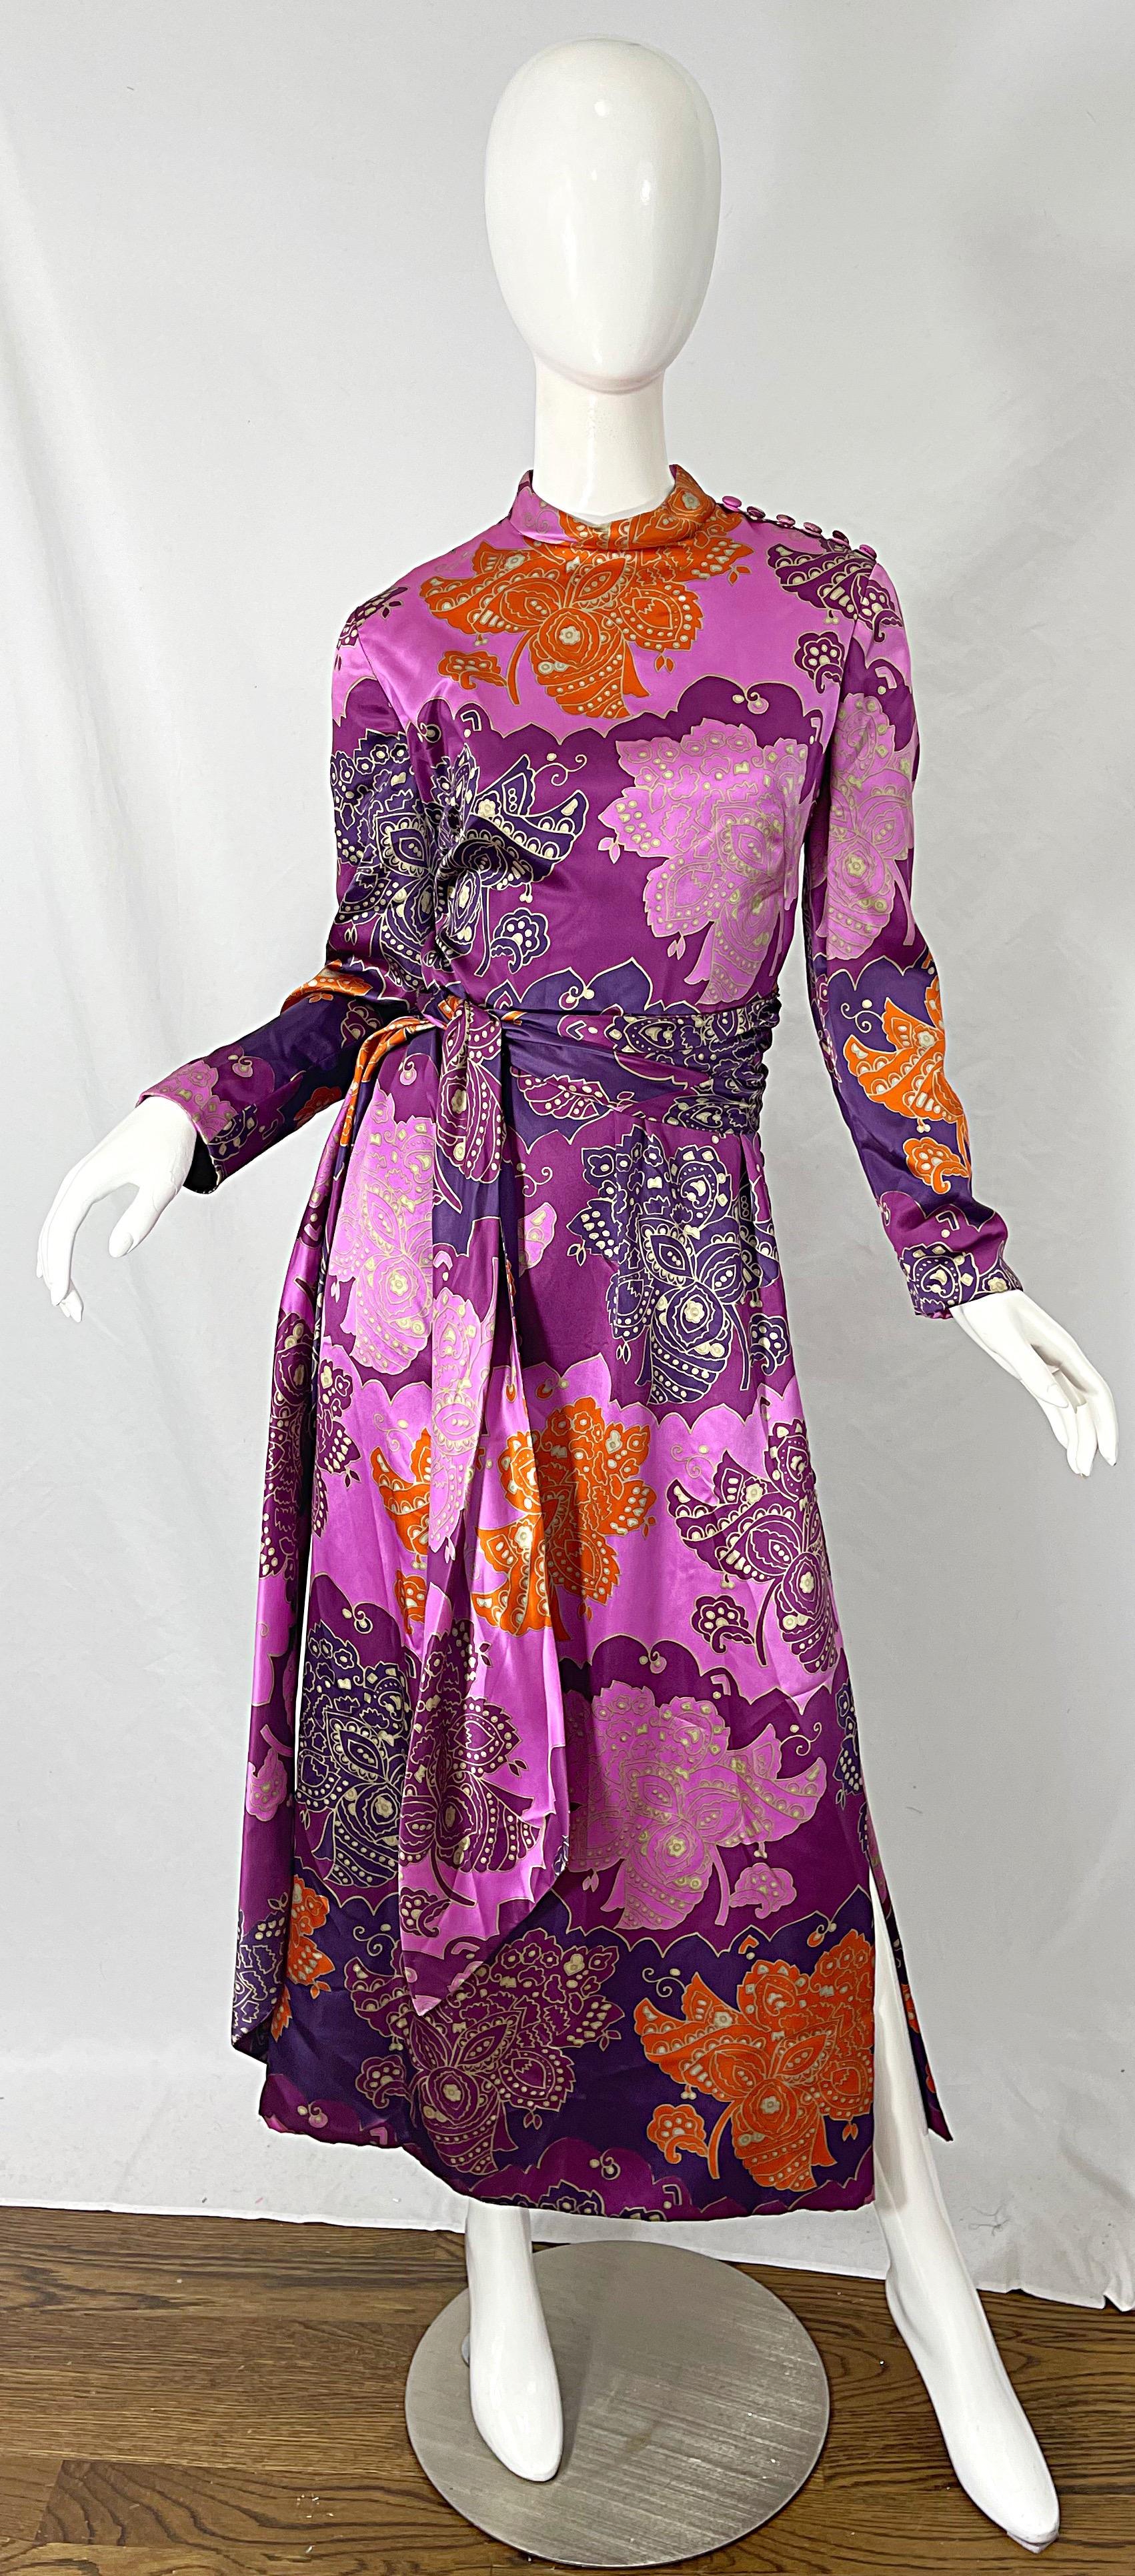 Incredible vintage 1970s ADELE SIMPSON paisley print silk maxi dress and sash belt ! Features vibrant warm colors of purple, lavender, orange and white throughout. Mock buttons up the side skirt and on the left shoulder. Hidden metal zipper up the